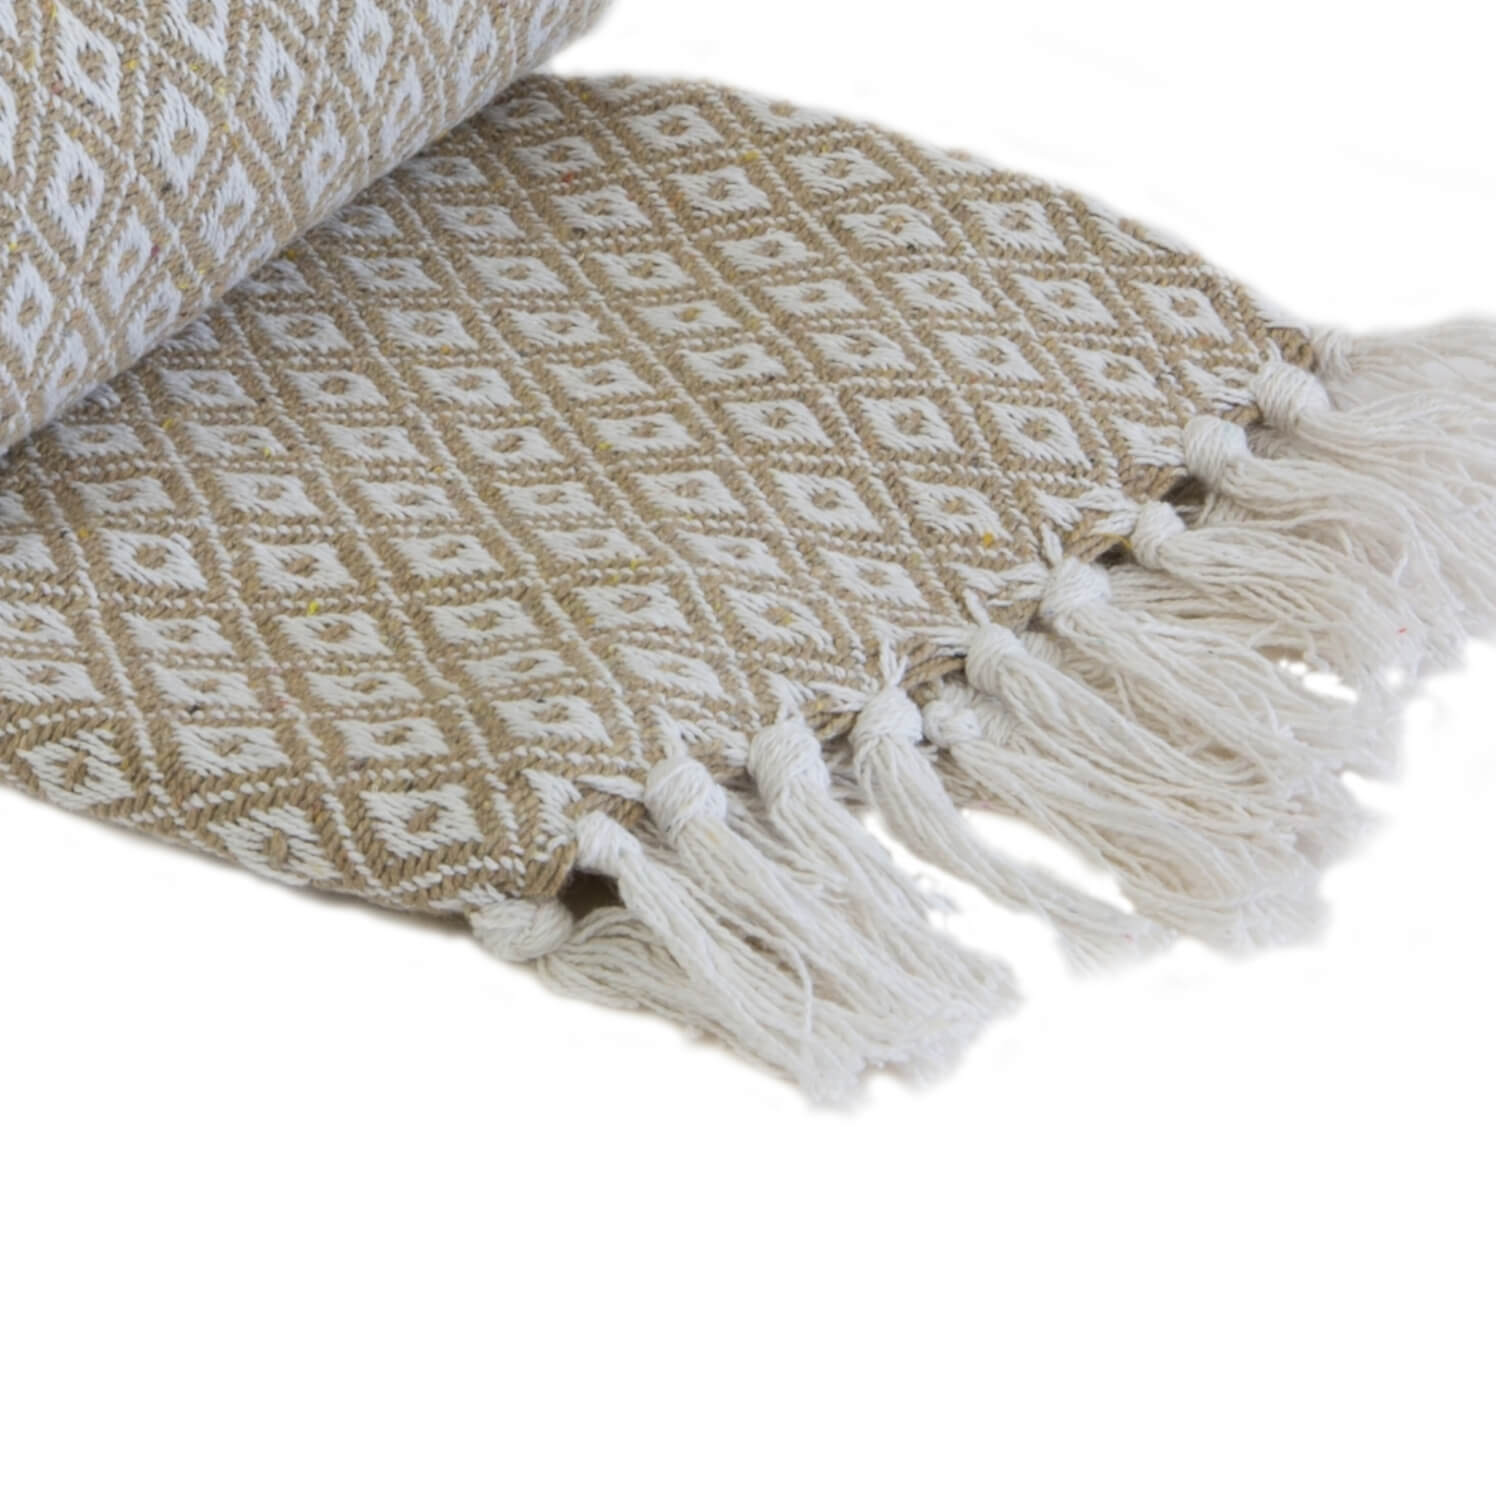 The Home Living Room Casablanca Throw 50cm x 60cm - Taupe 2 Shaws Department Stores